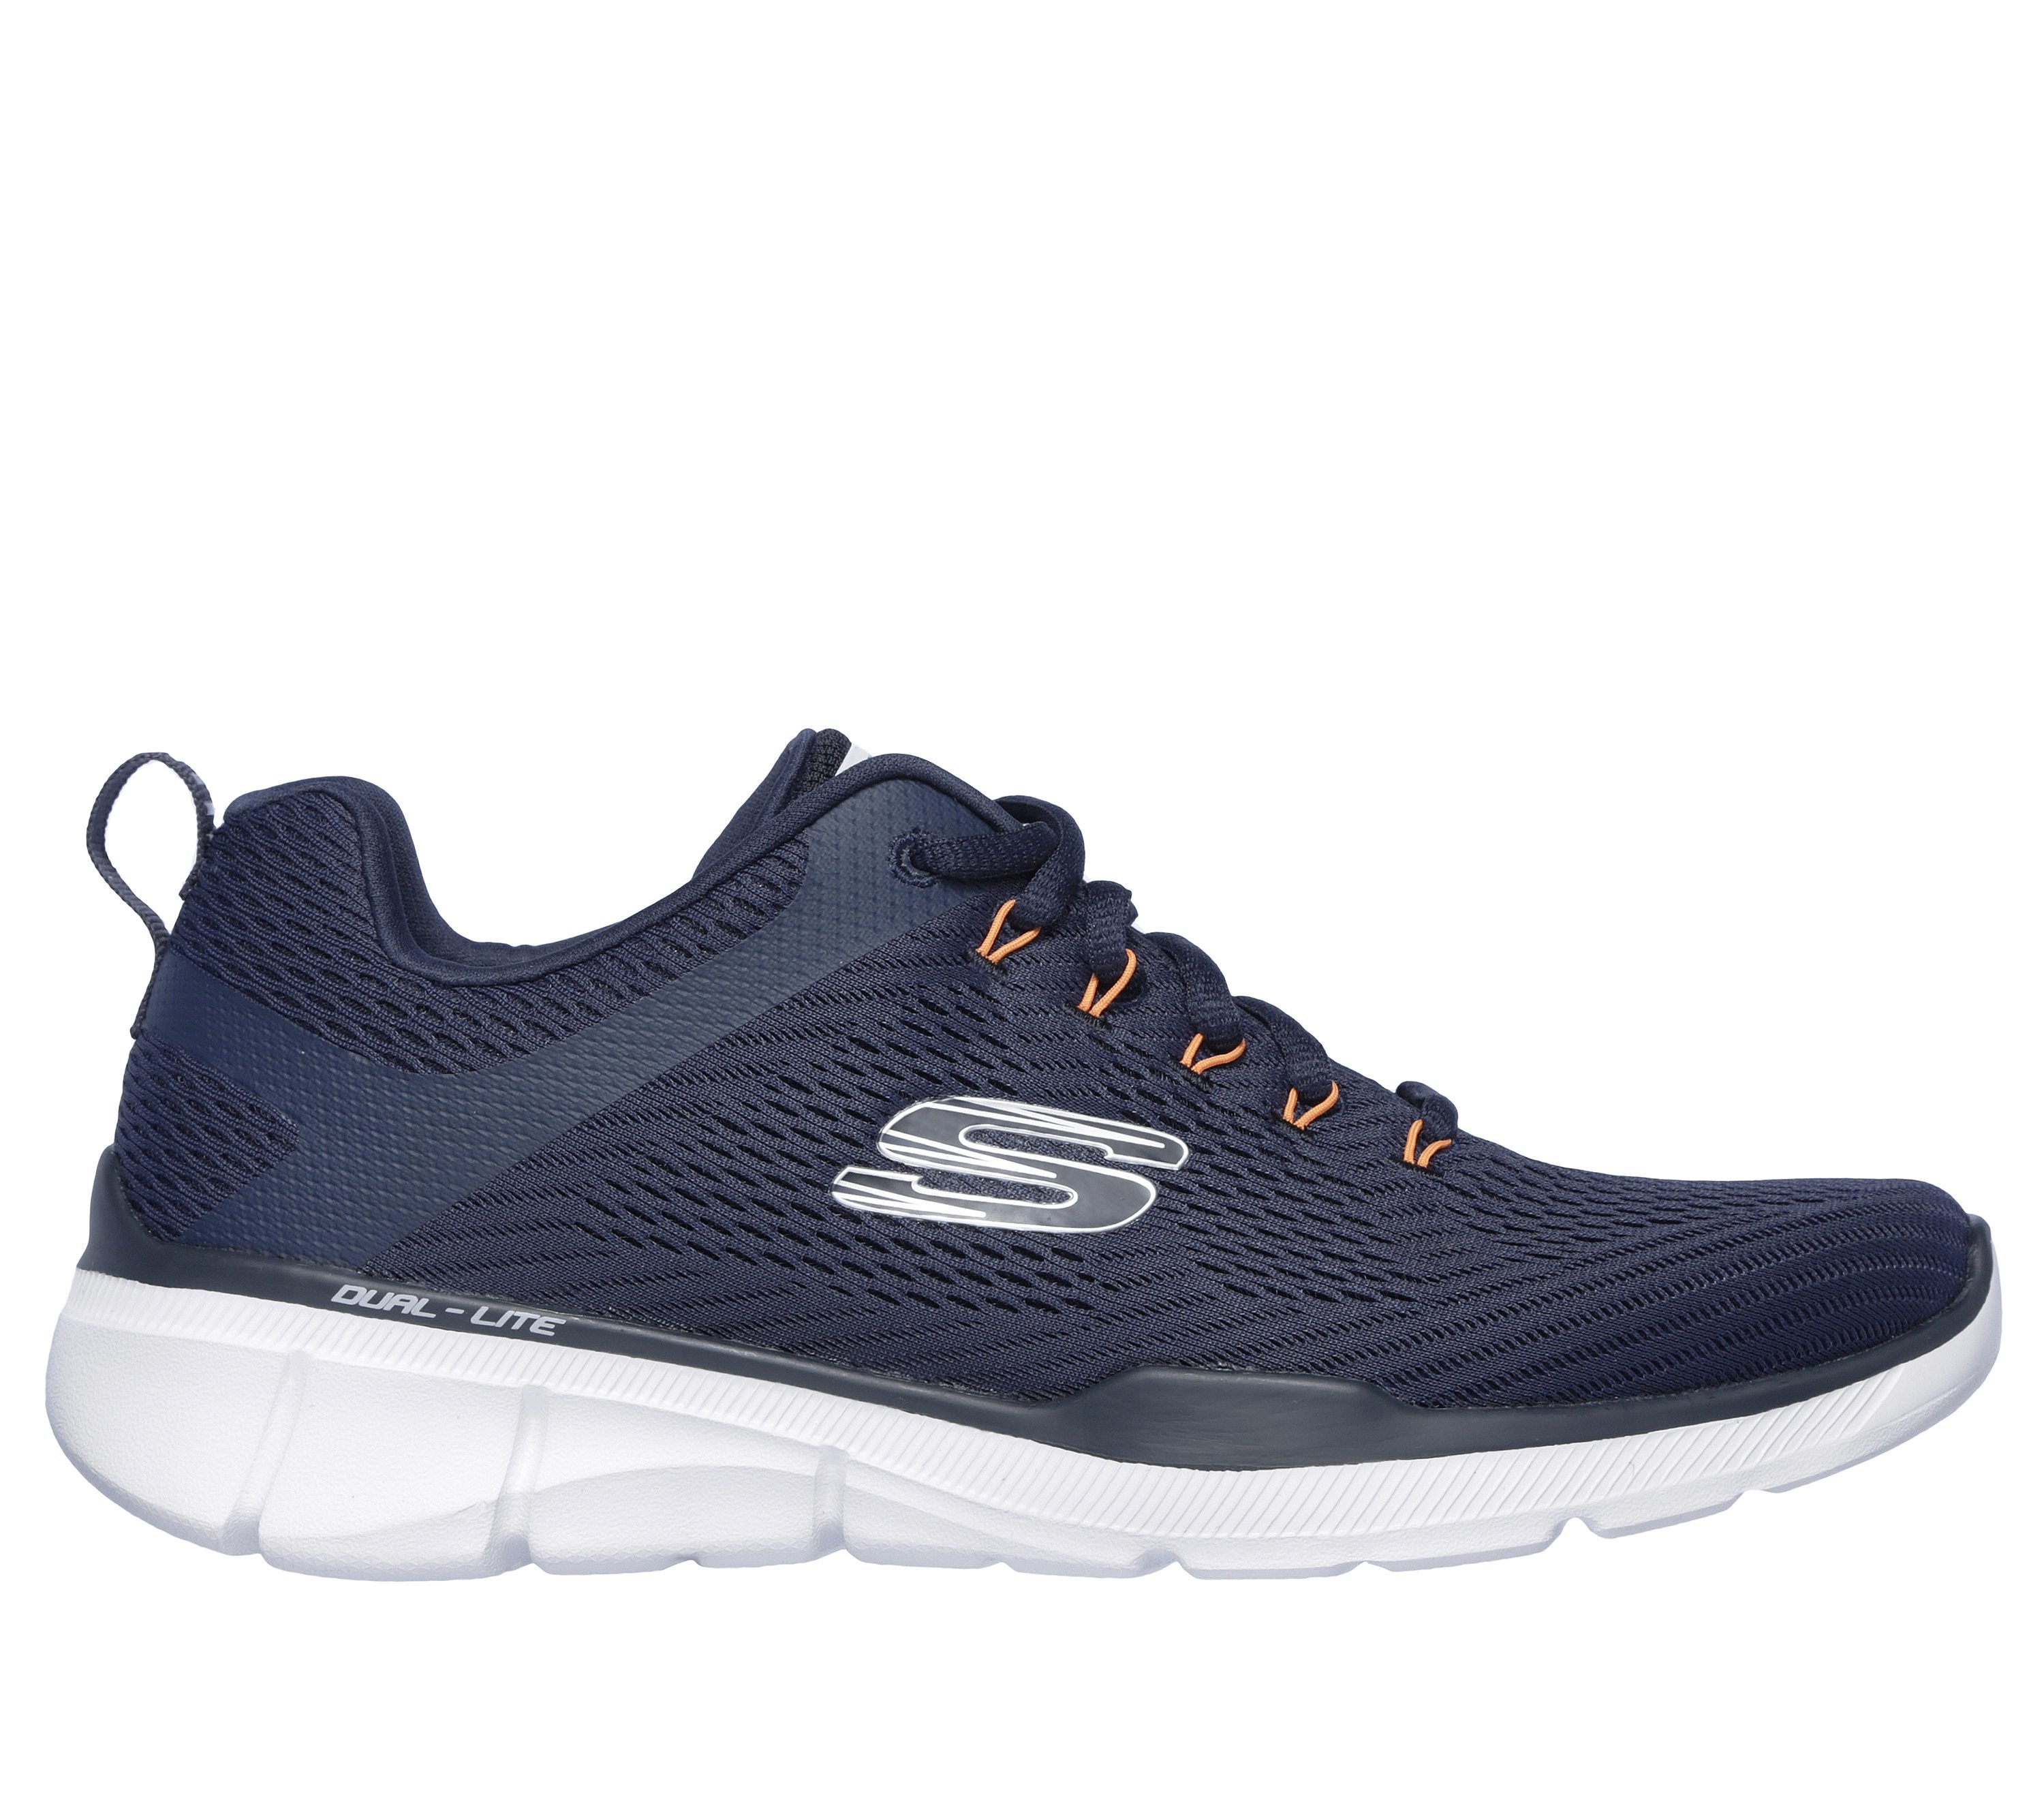 Roux eco Redada Relaxed Fit: Equalizer 3.0 | SKECHERS ES